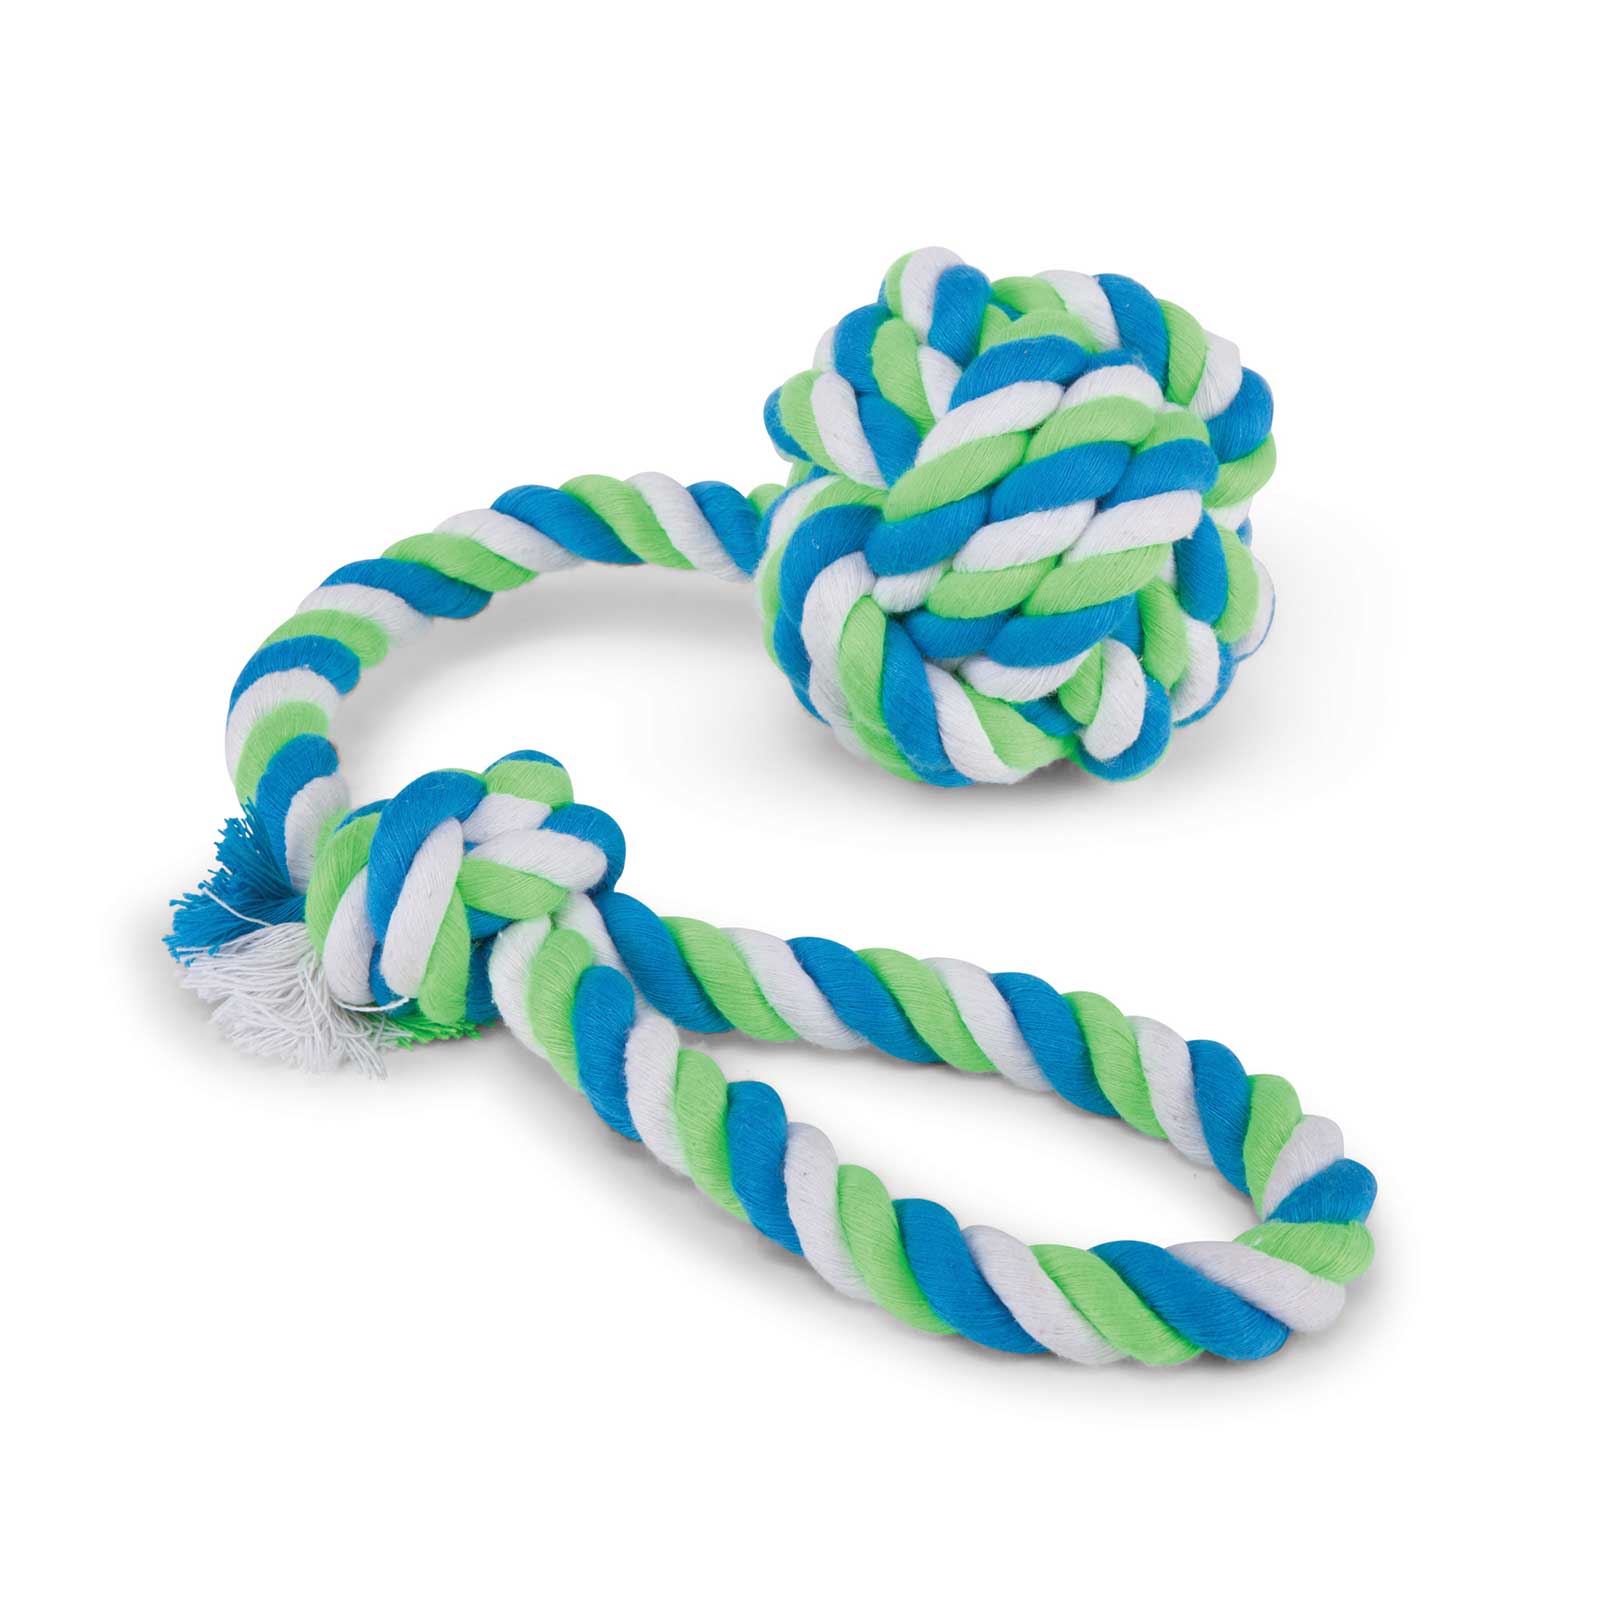 Kazoo Twisted Rope Sling Knot Ball Dog Toy